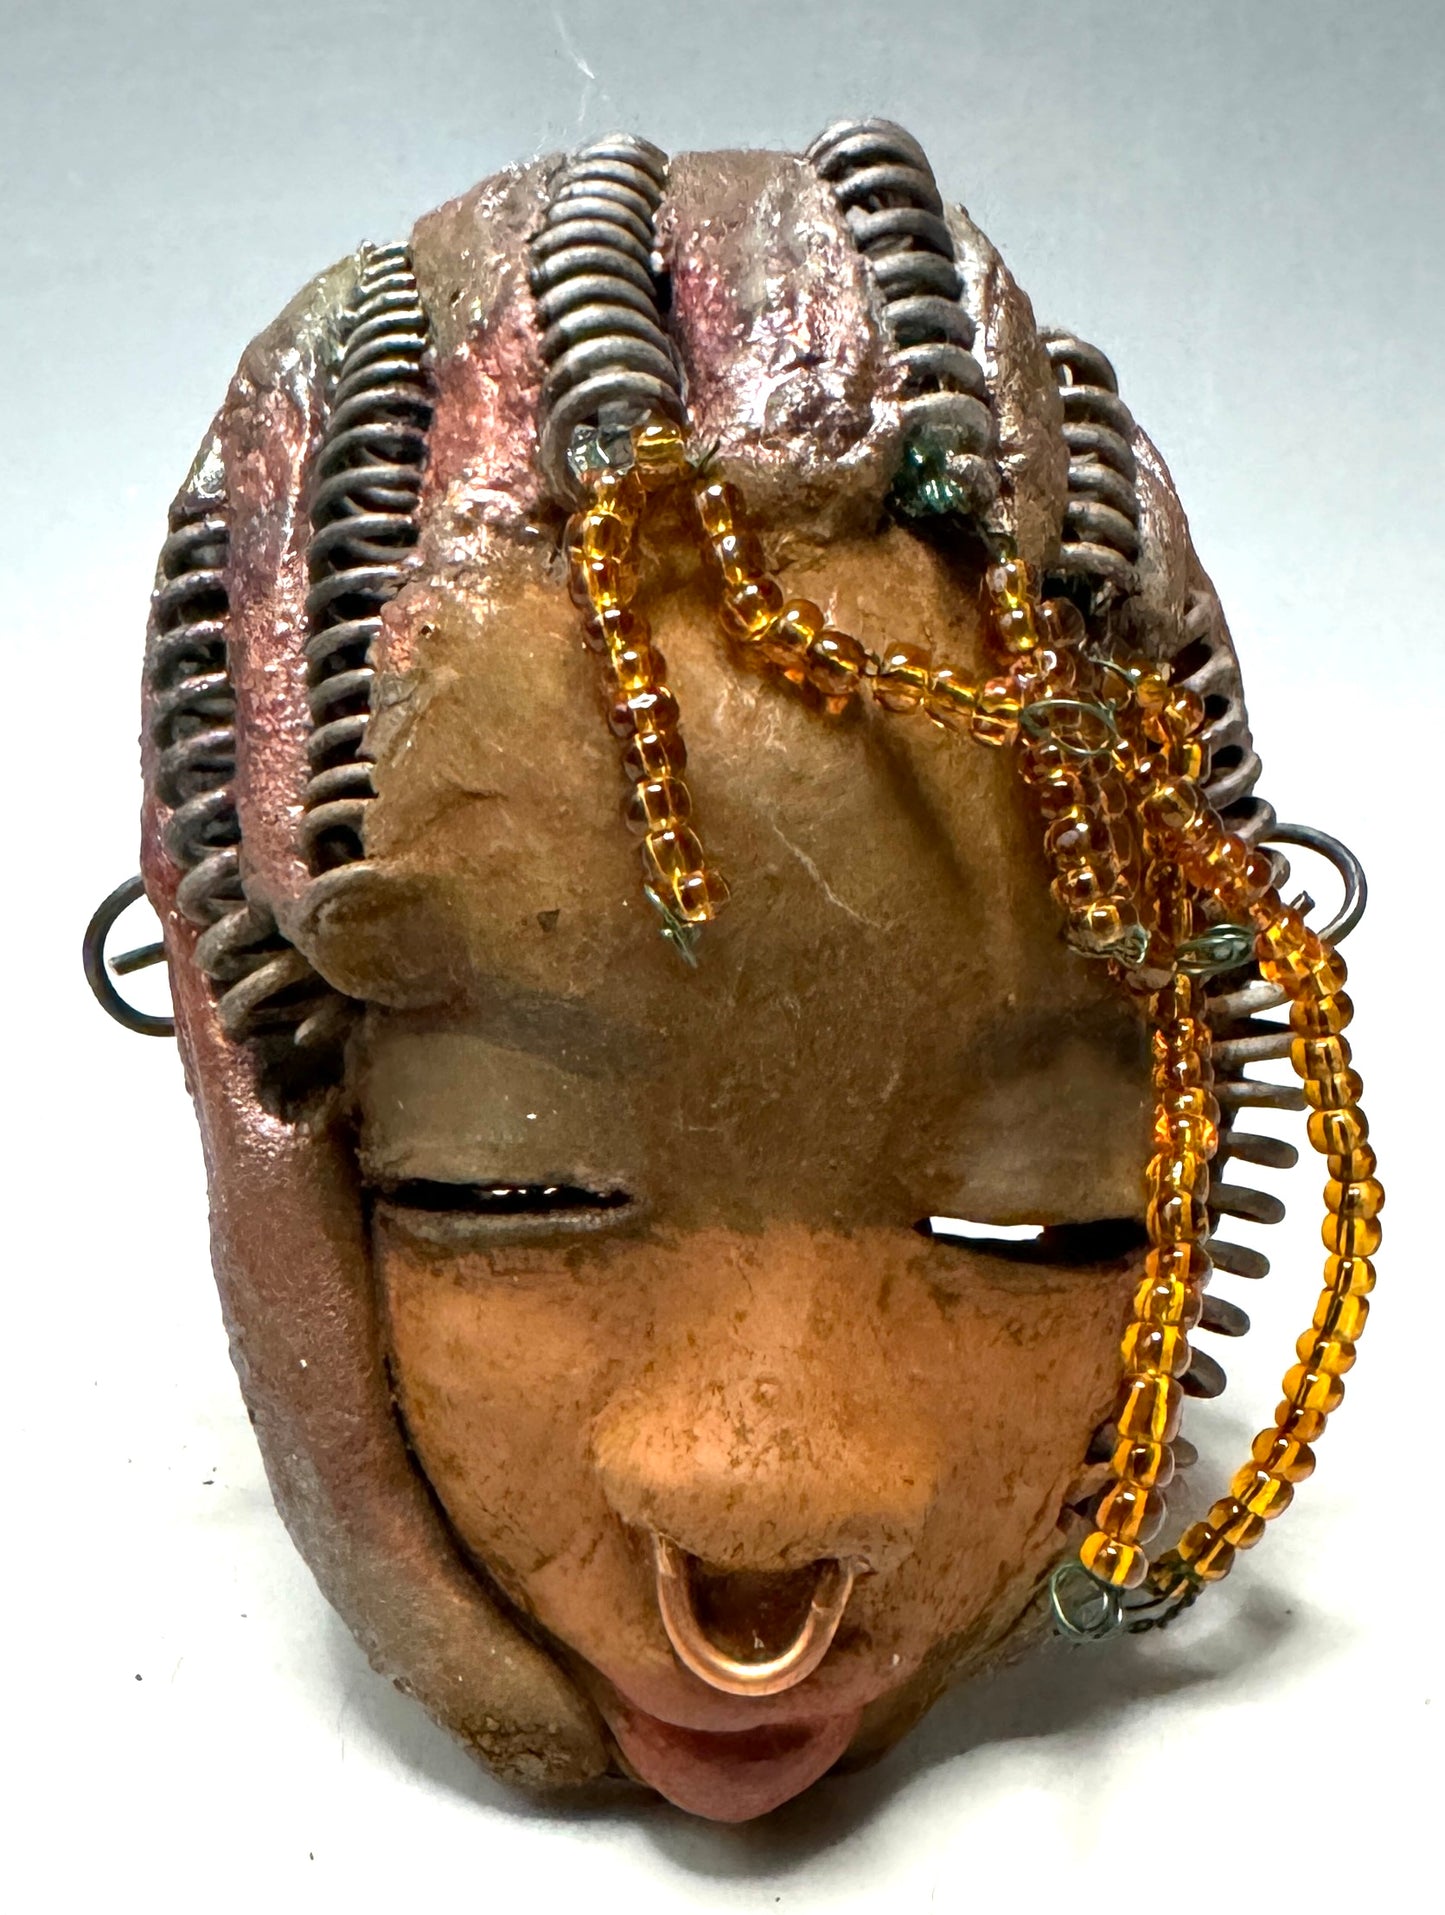 Kenya weighs 5 oz and is 4" by 3" in diameter. Her hair is coppered braided, her complexion is a light gray-blue, and her lips are black. She is a perfect item to start with from the HerDew mask collection. Shadowbox not included.